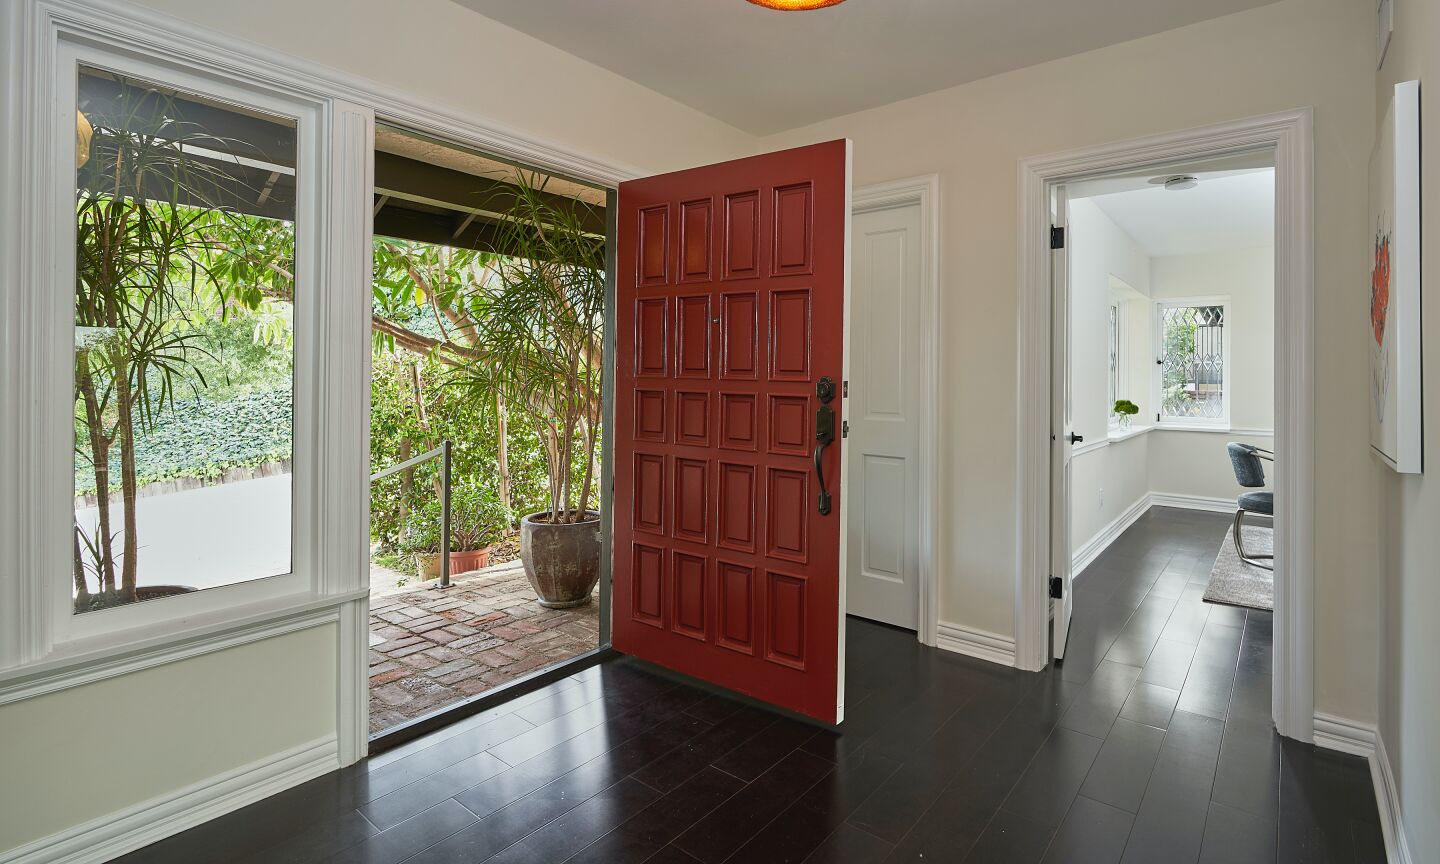 From inside, a view of the open front door, dark wood floors and adjoining light-filled room.